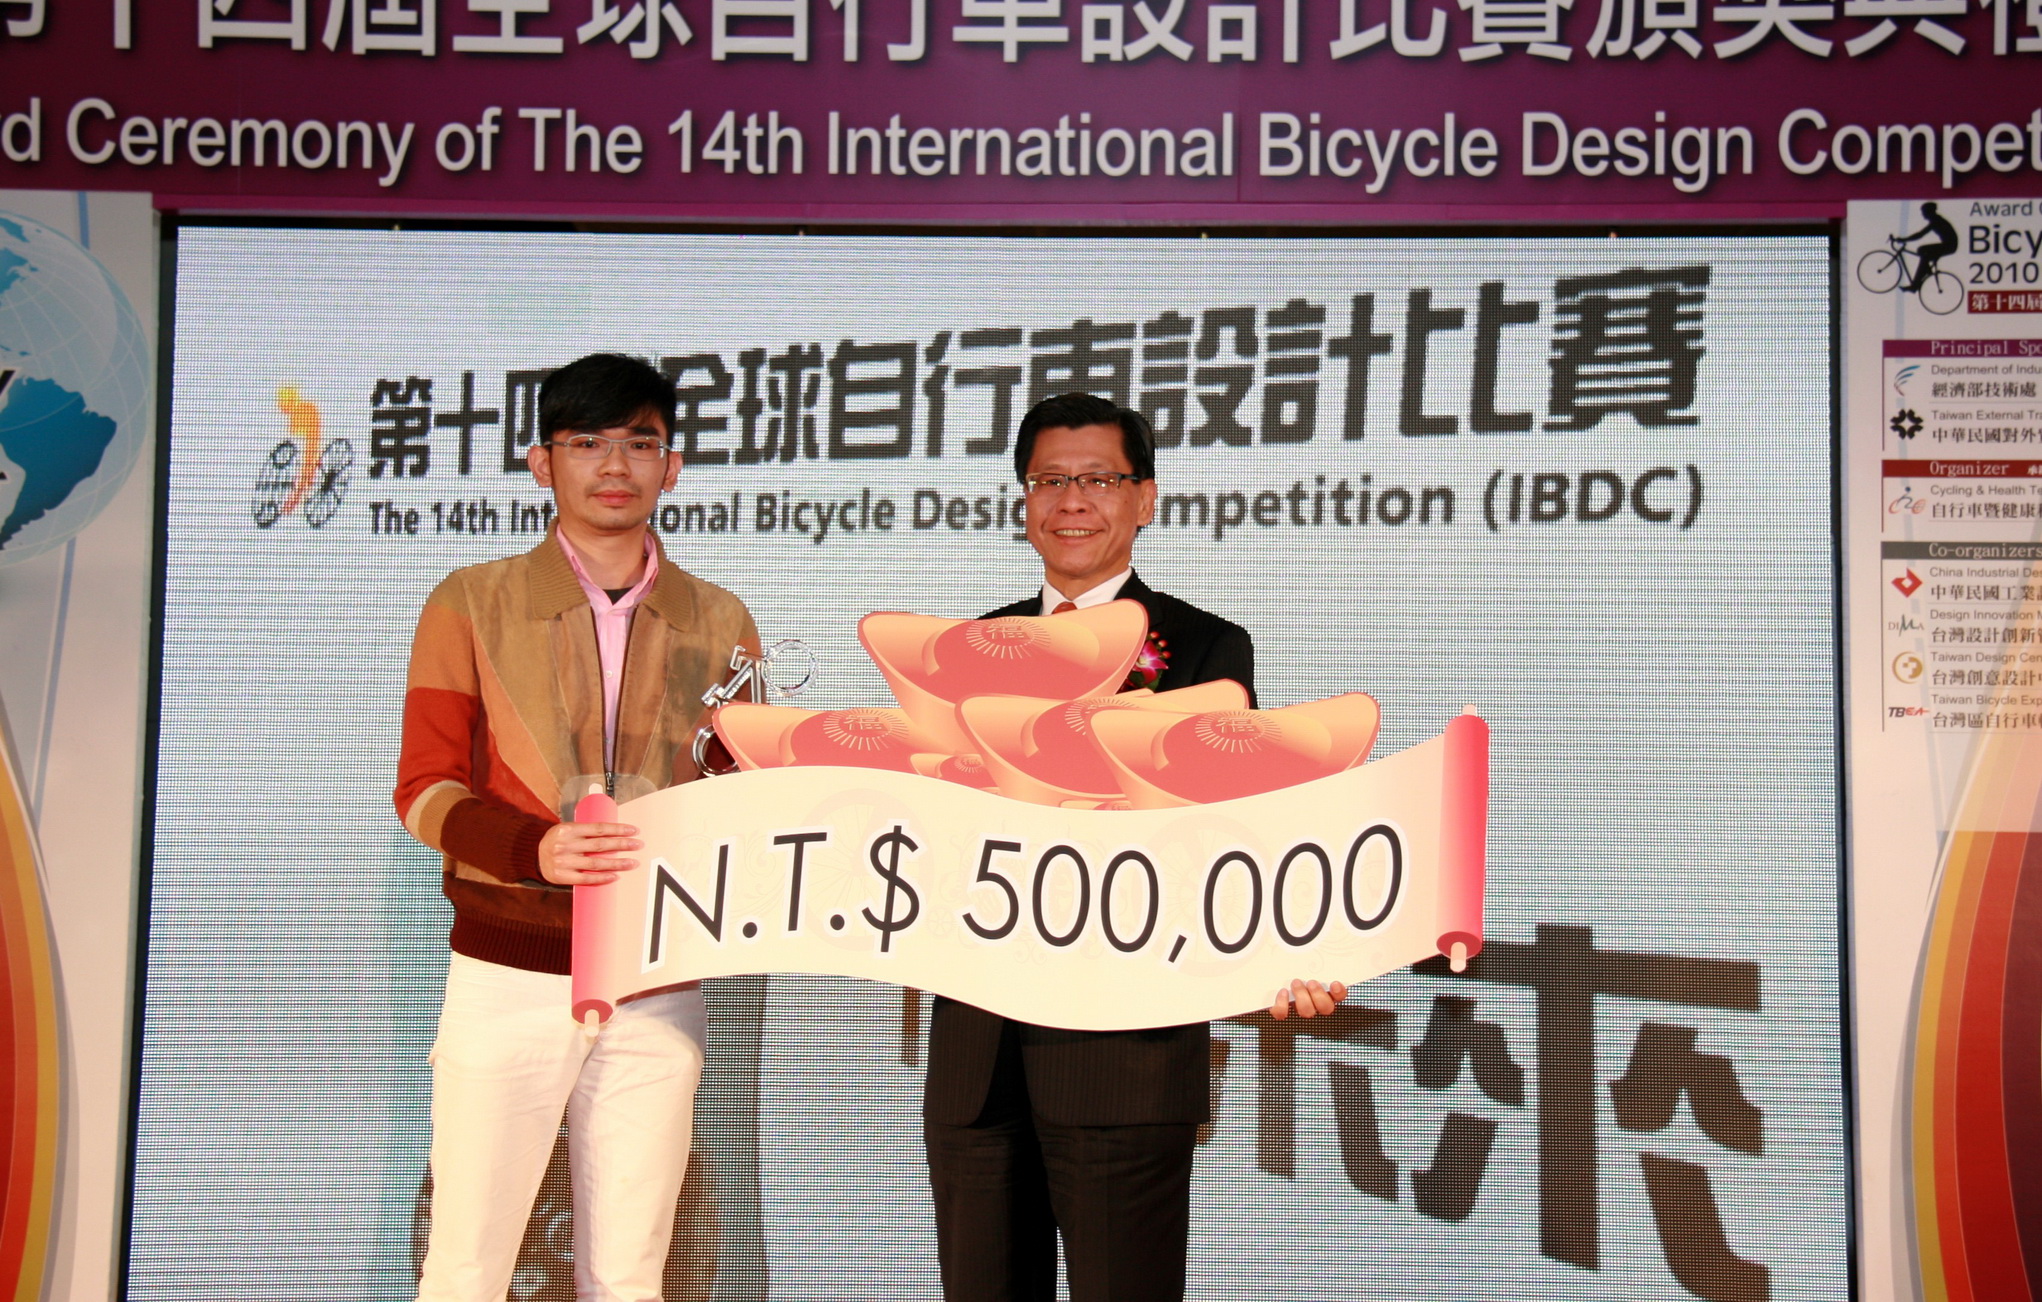 Shi Huang (left), the Taiwanese winner of 14th IBDC Gold Award and about US$16,000 in prize.